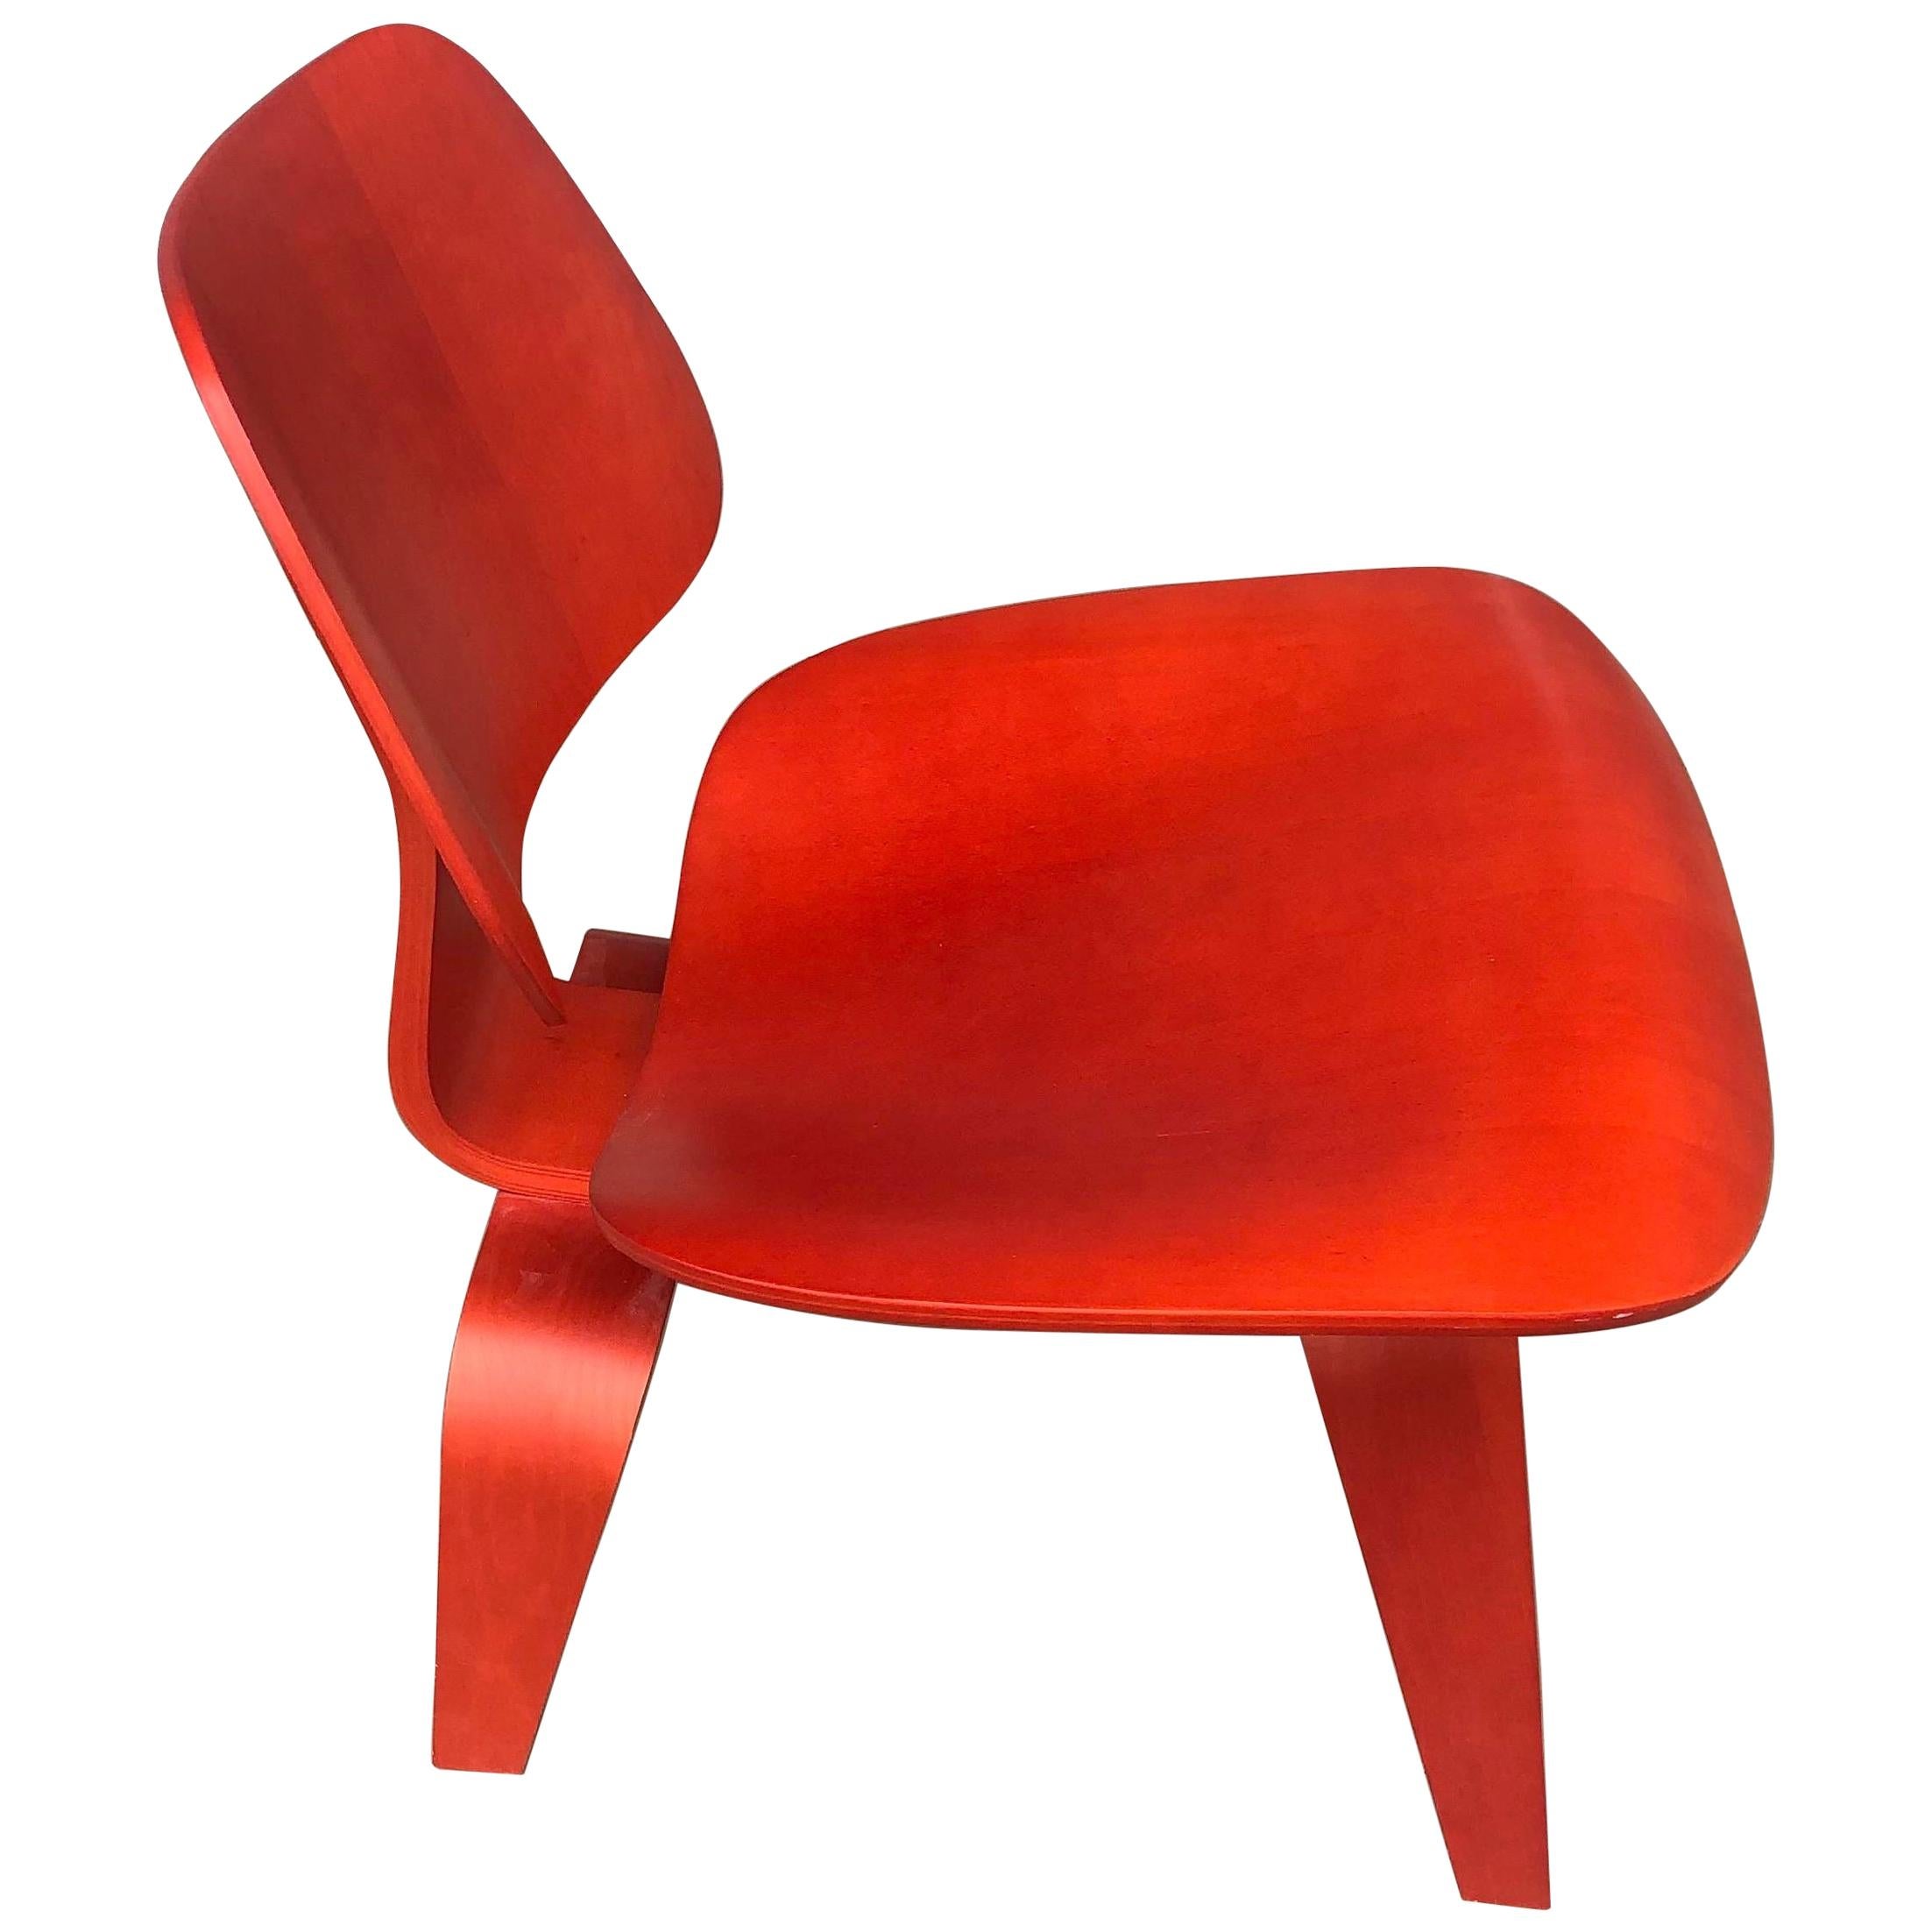 Charles and Ray Eames Molded Plywood Lounge Chair Wood, LCW, Red Stained Birch